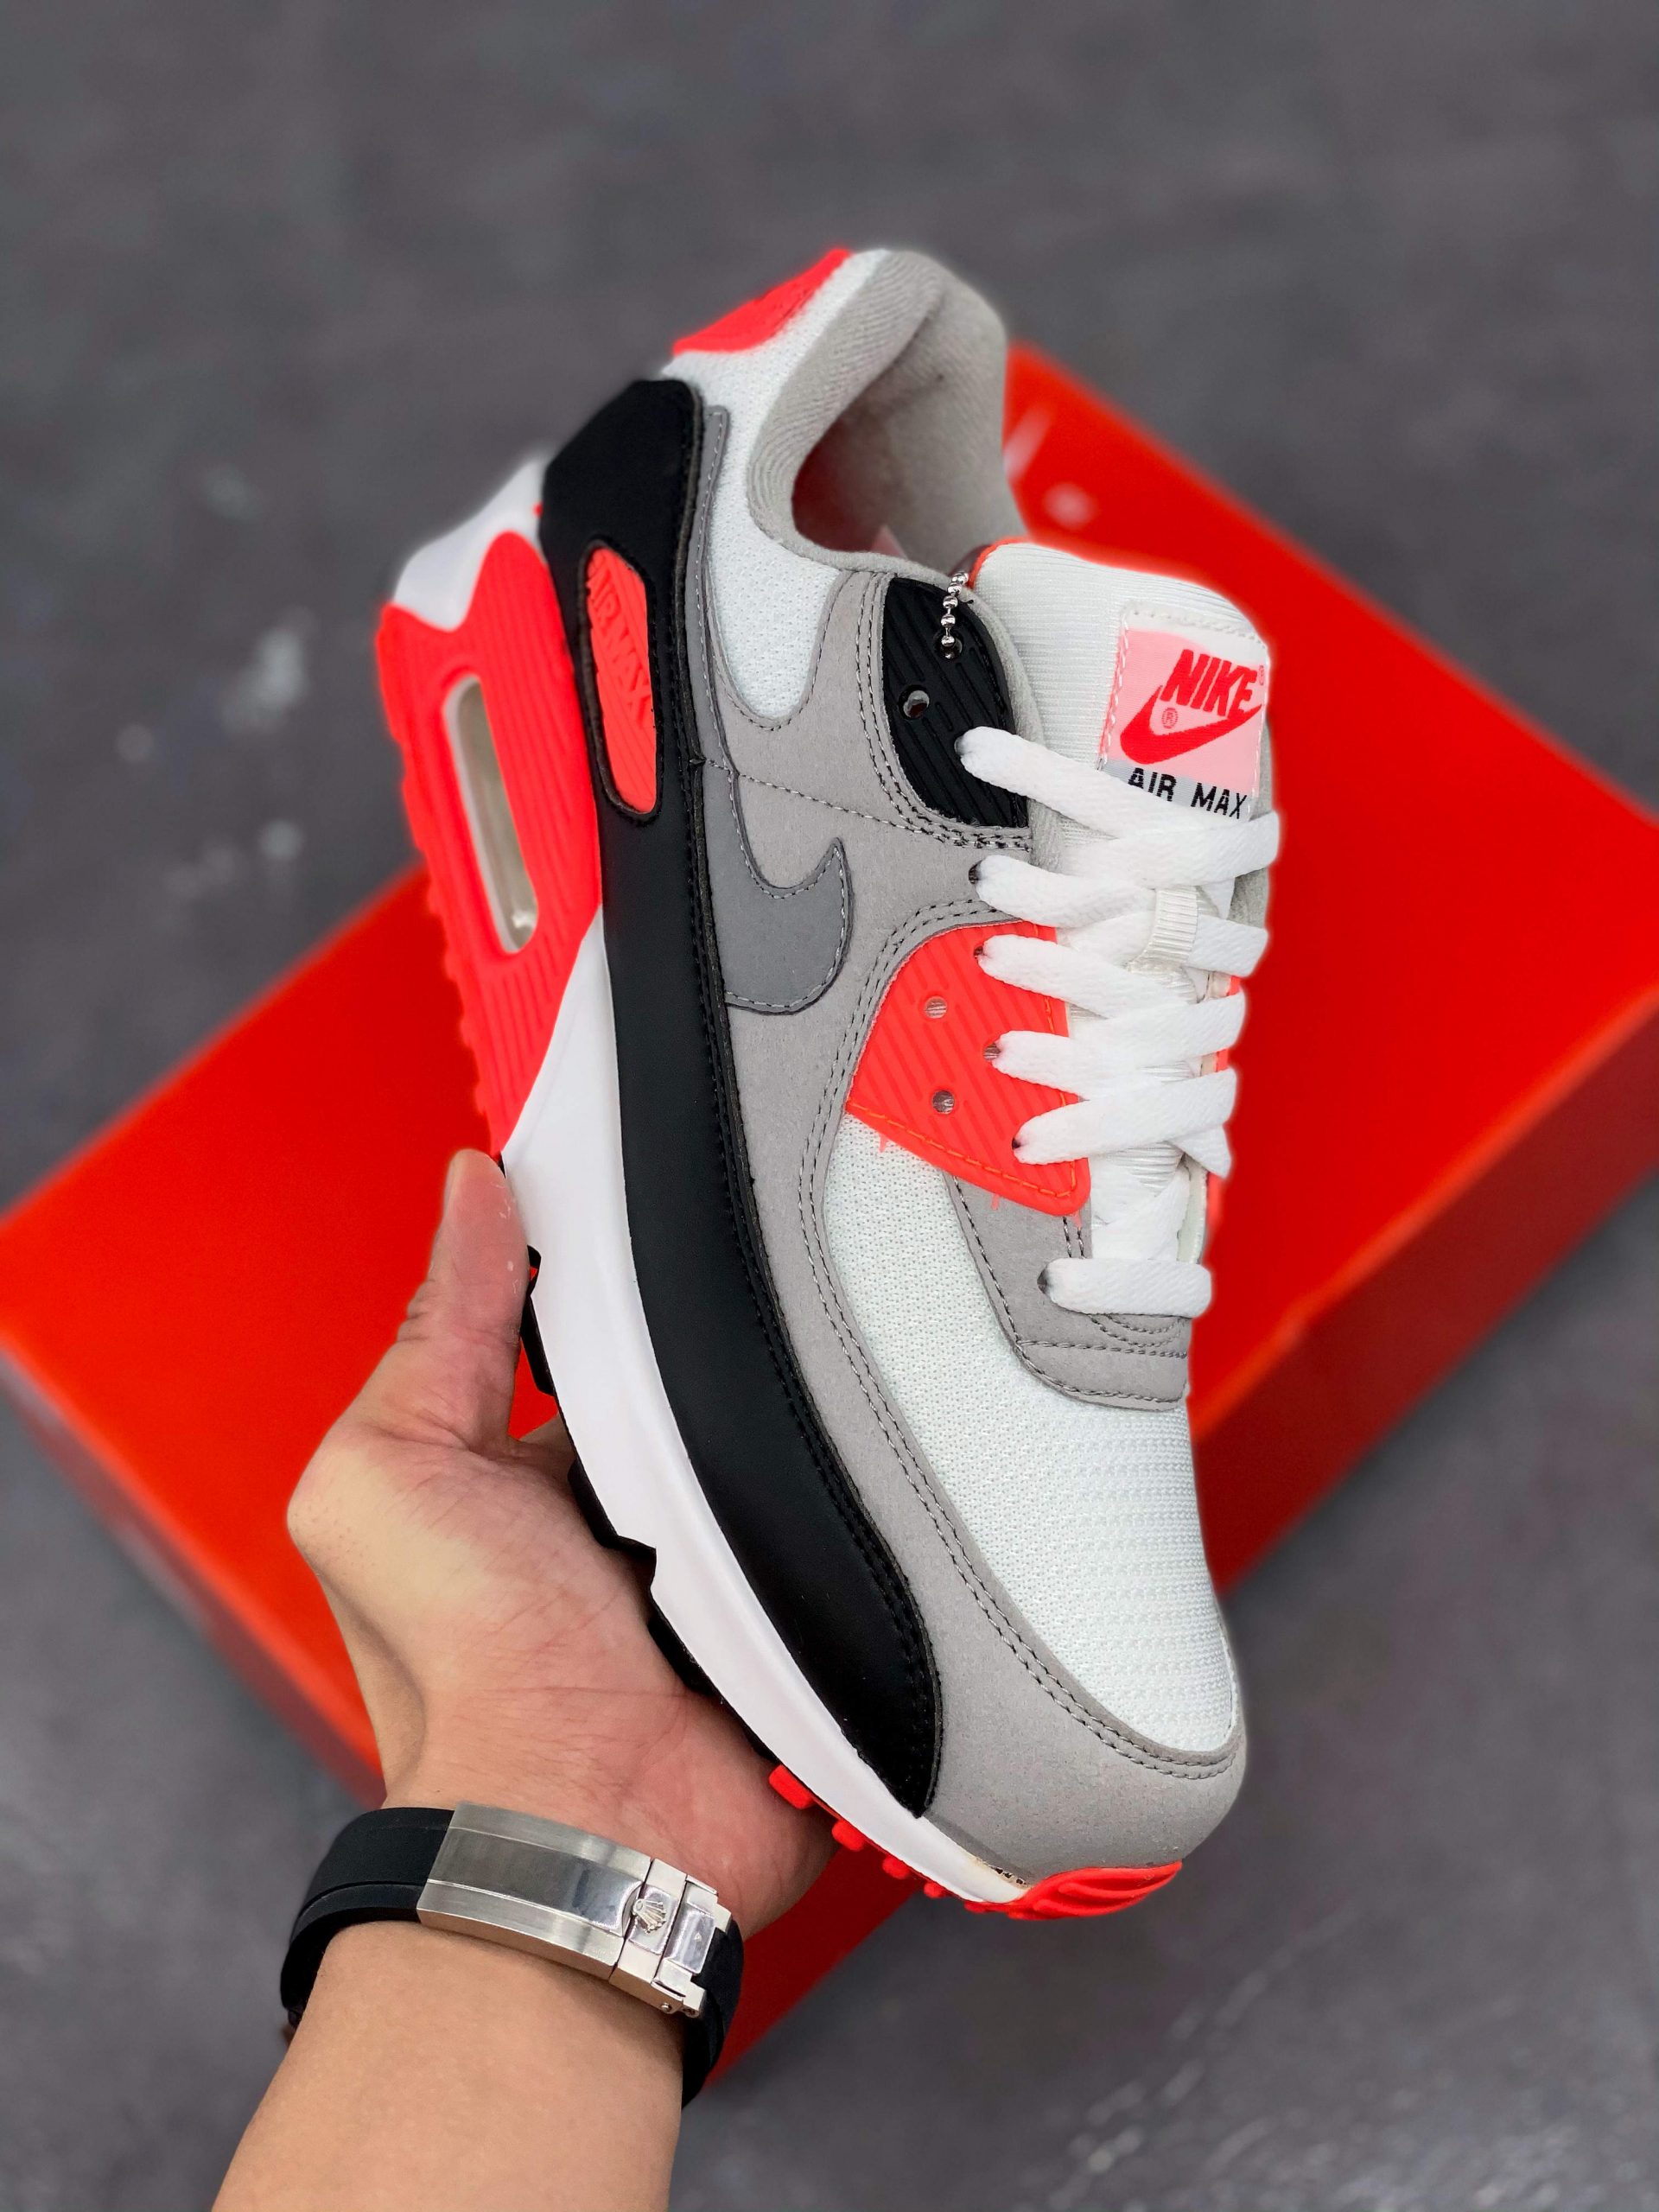 Nike Air Max 90 OG "Infrared" White/Black-Cool Grey-Radiant Red Shoes